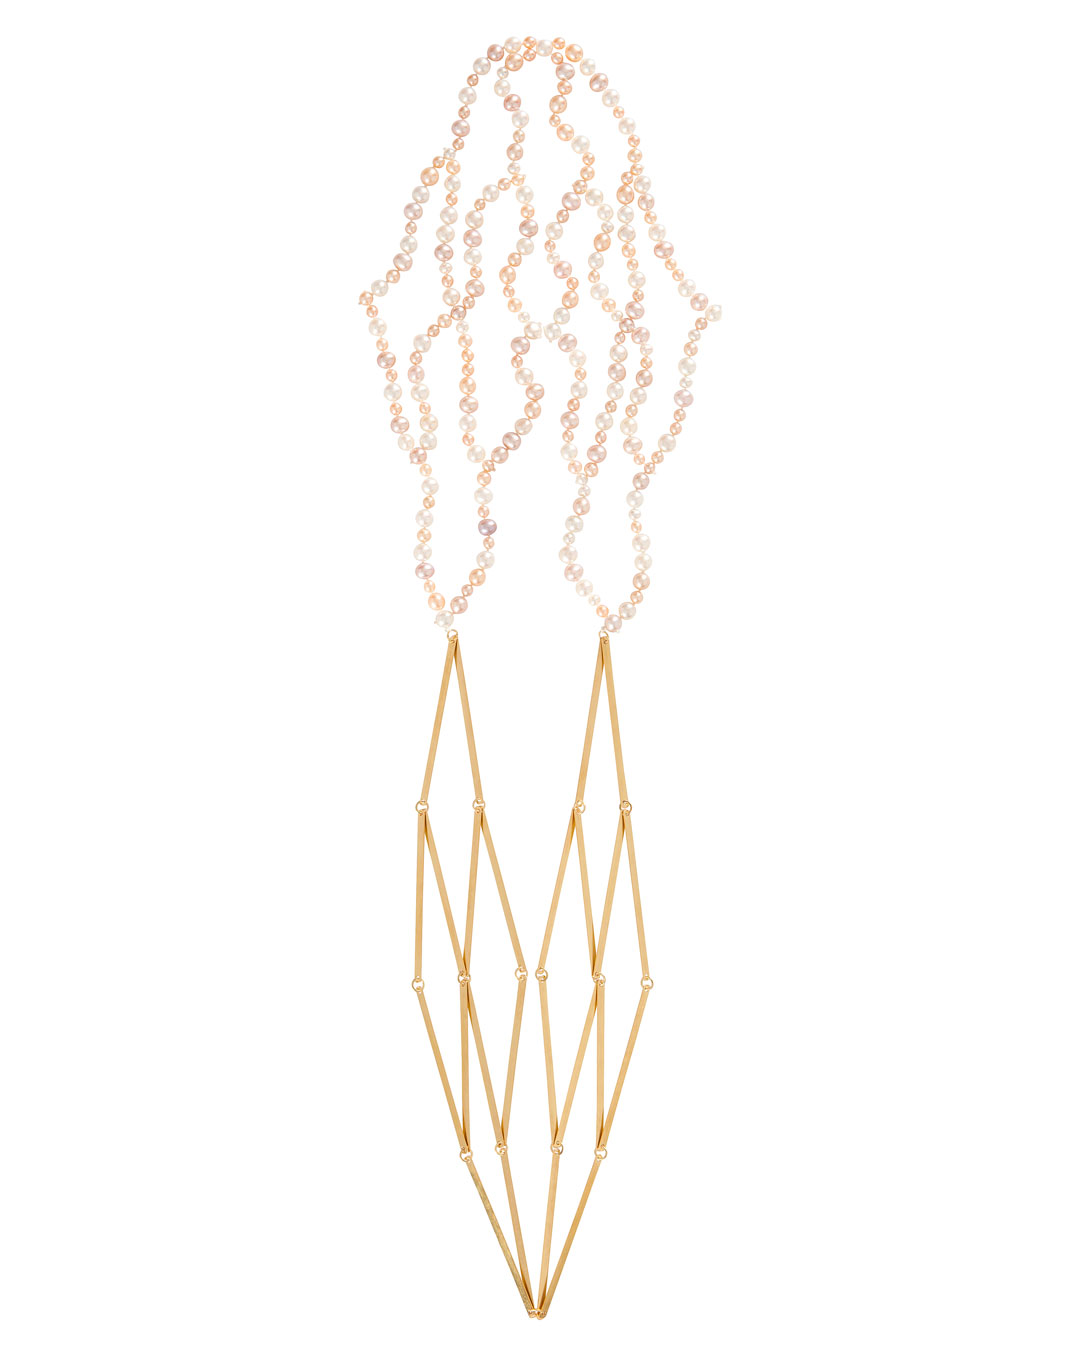 Annelies Planteijdt, Mooie stad – Collier en schelpen (Beautiful City - Necklace and Shells), 2017, necklace; gold, freshwater pearls, 90 x 450 mm, price on request (image 1/2)